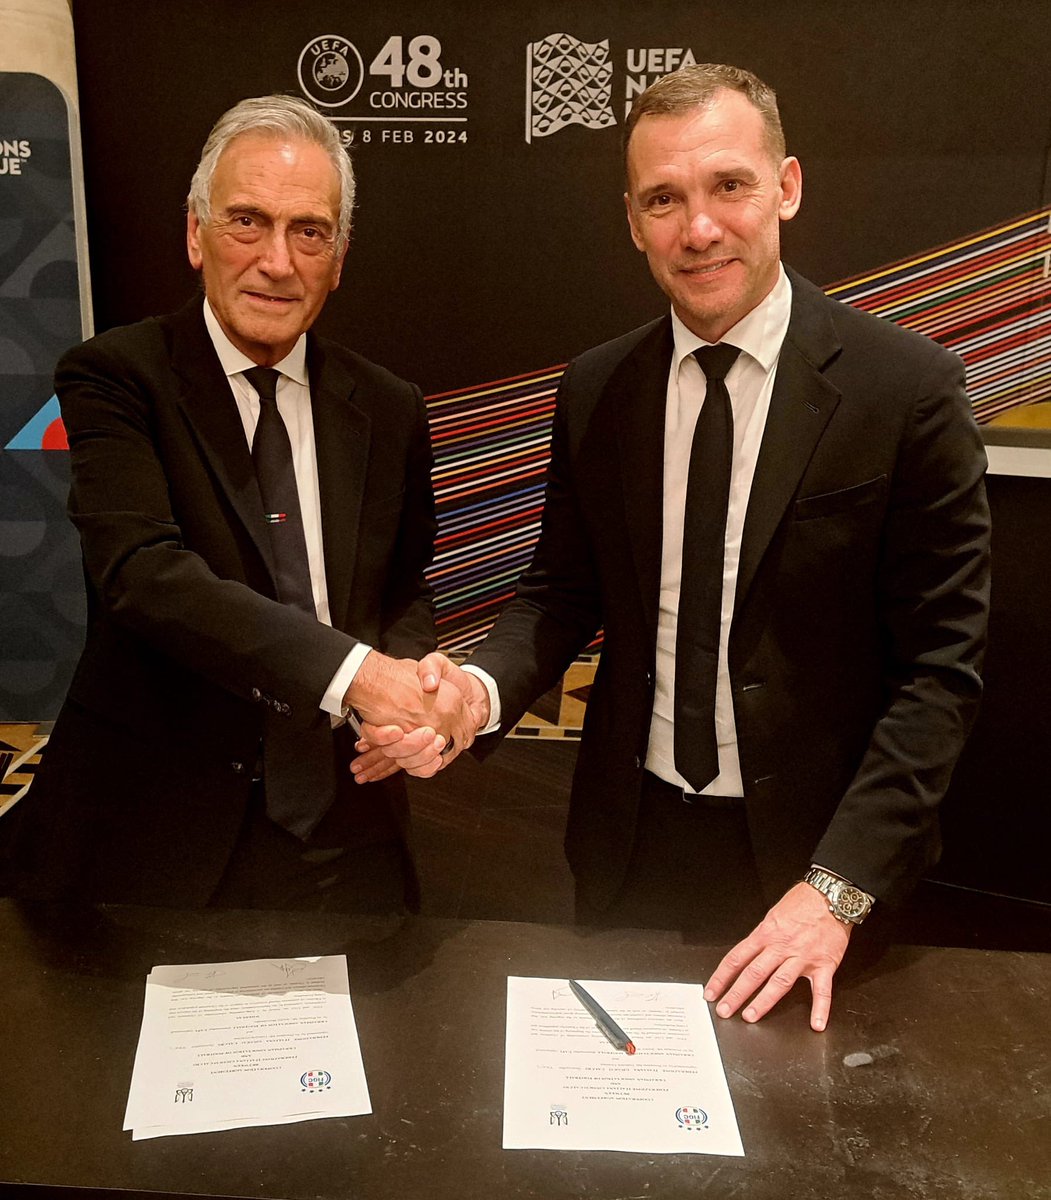 During the UEFA Congress, the Ukrainian and Italian football associations signed a memorandum of cooperation. The FIGC and the UAF are launching a new project: it has been agreed to run training activities for young Ukrainian football players and coaches.